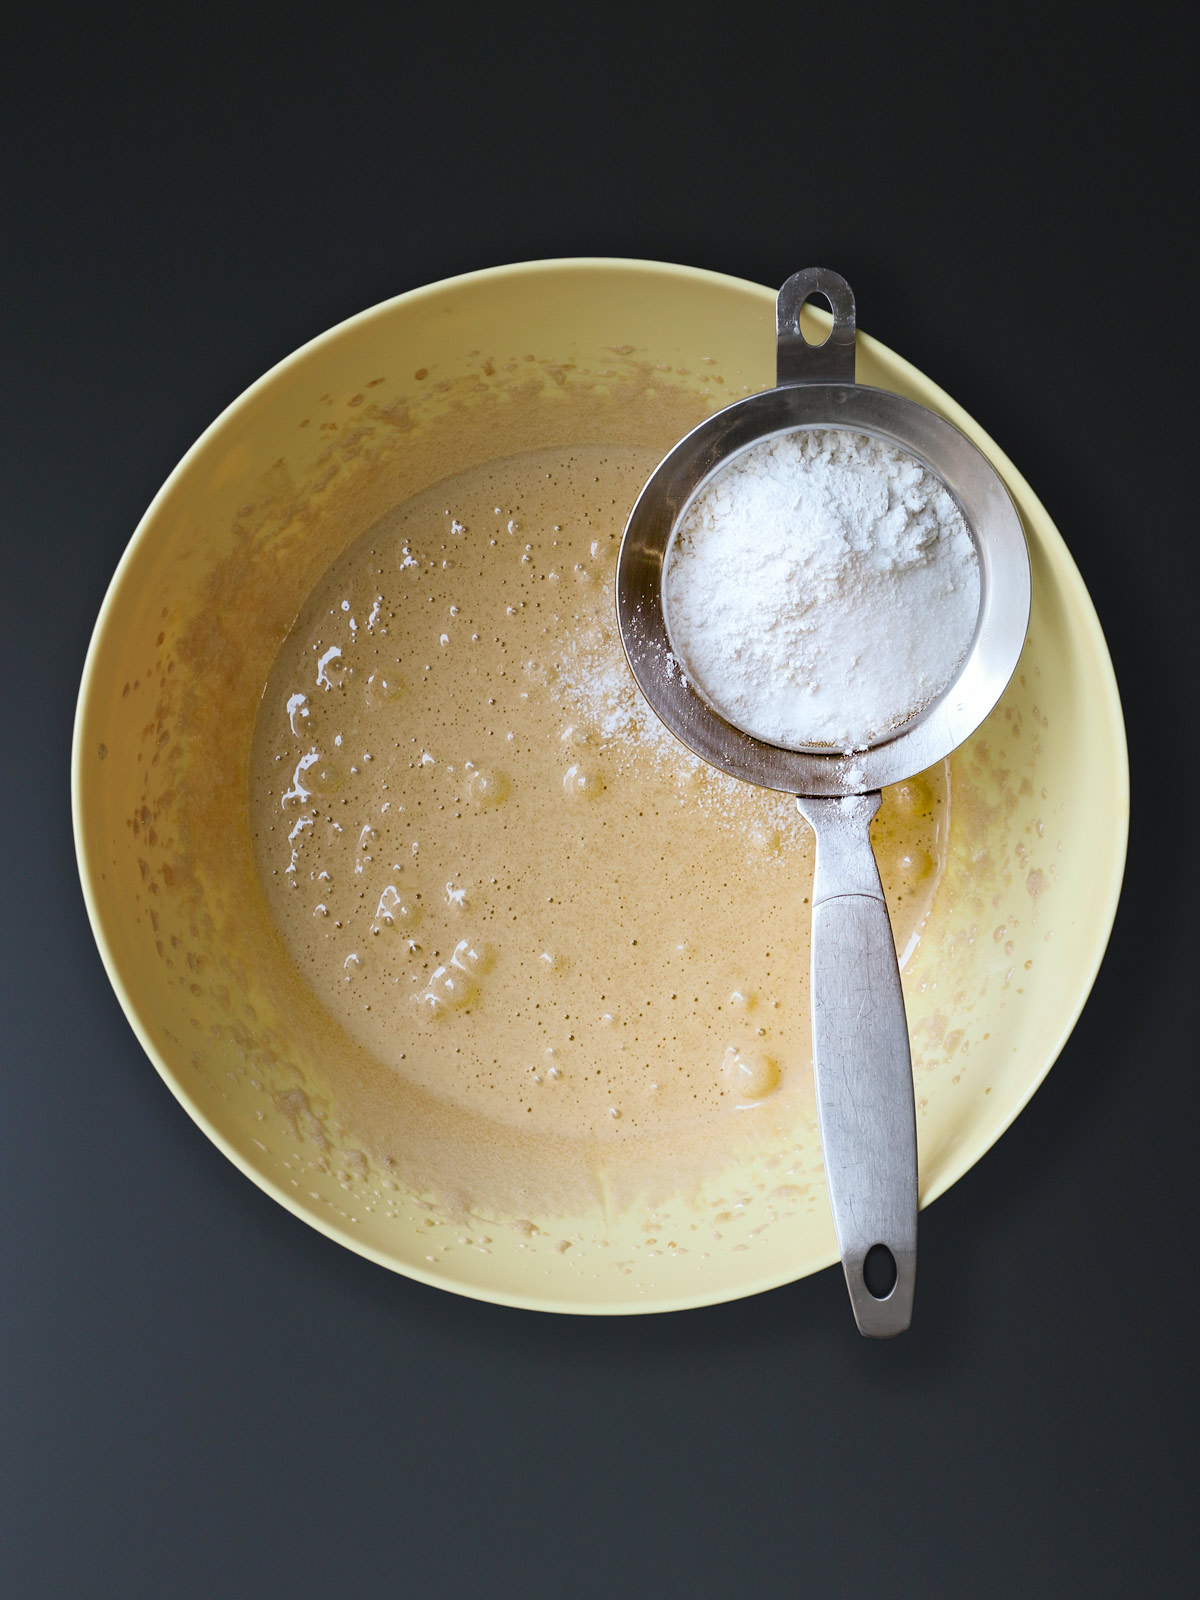 sifter over yellow bowl of egg and sugar mixture.